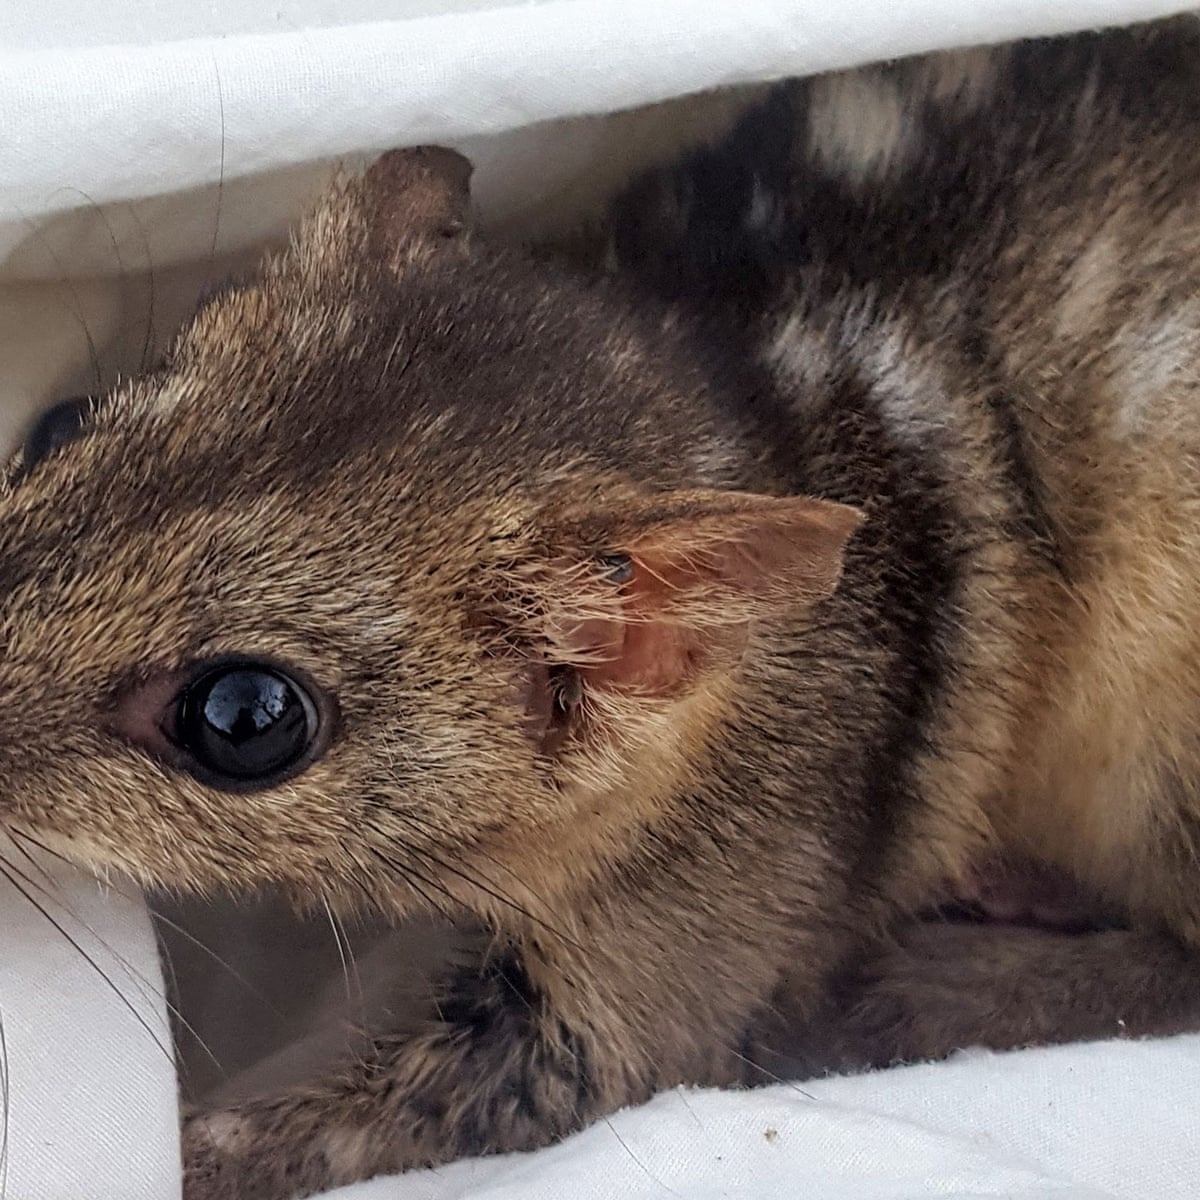 Dying for sex: endangered male quolls may be mating themselves to death  instead of sleeping, scientists say | Endangered species | The Guardian